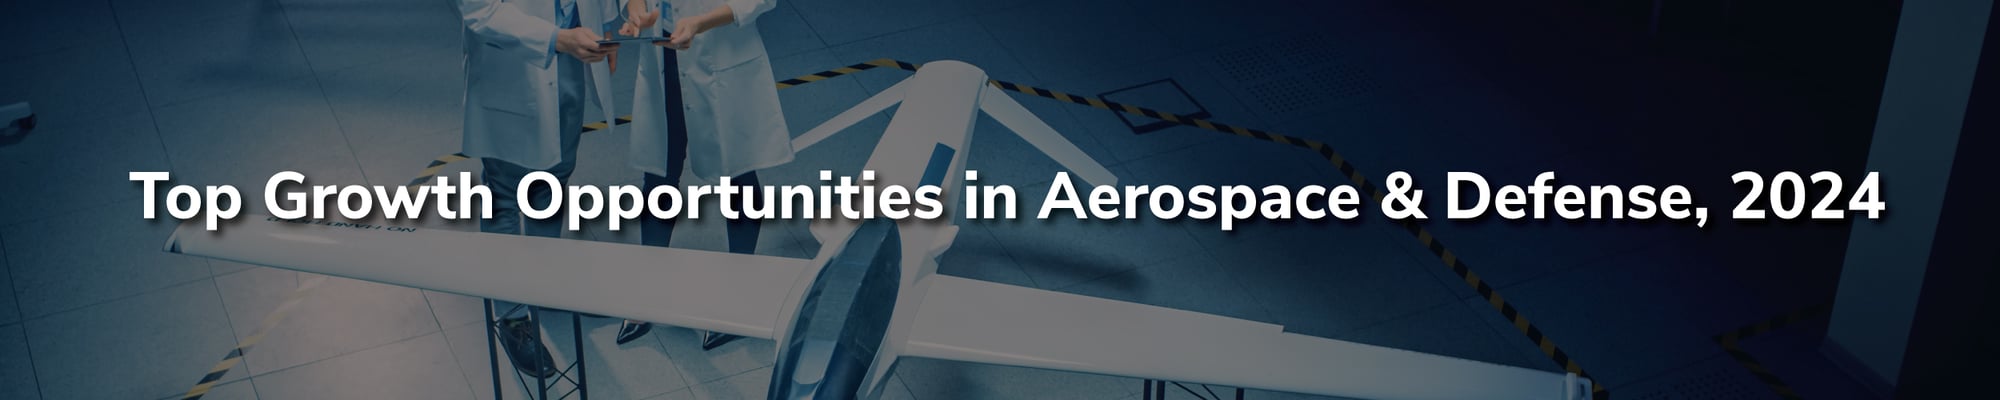 Top Growth Opportunities in Aerospace & Defense, 2024